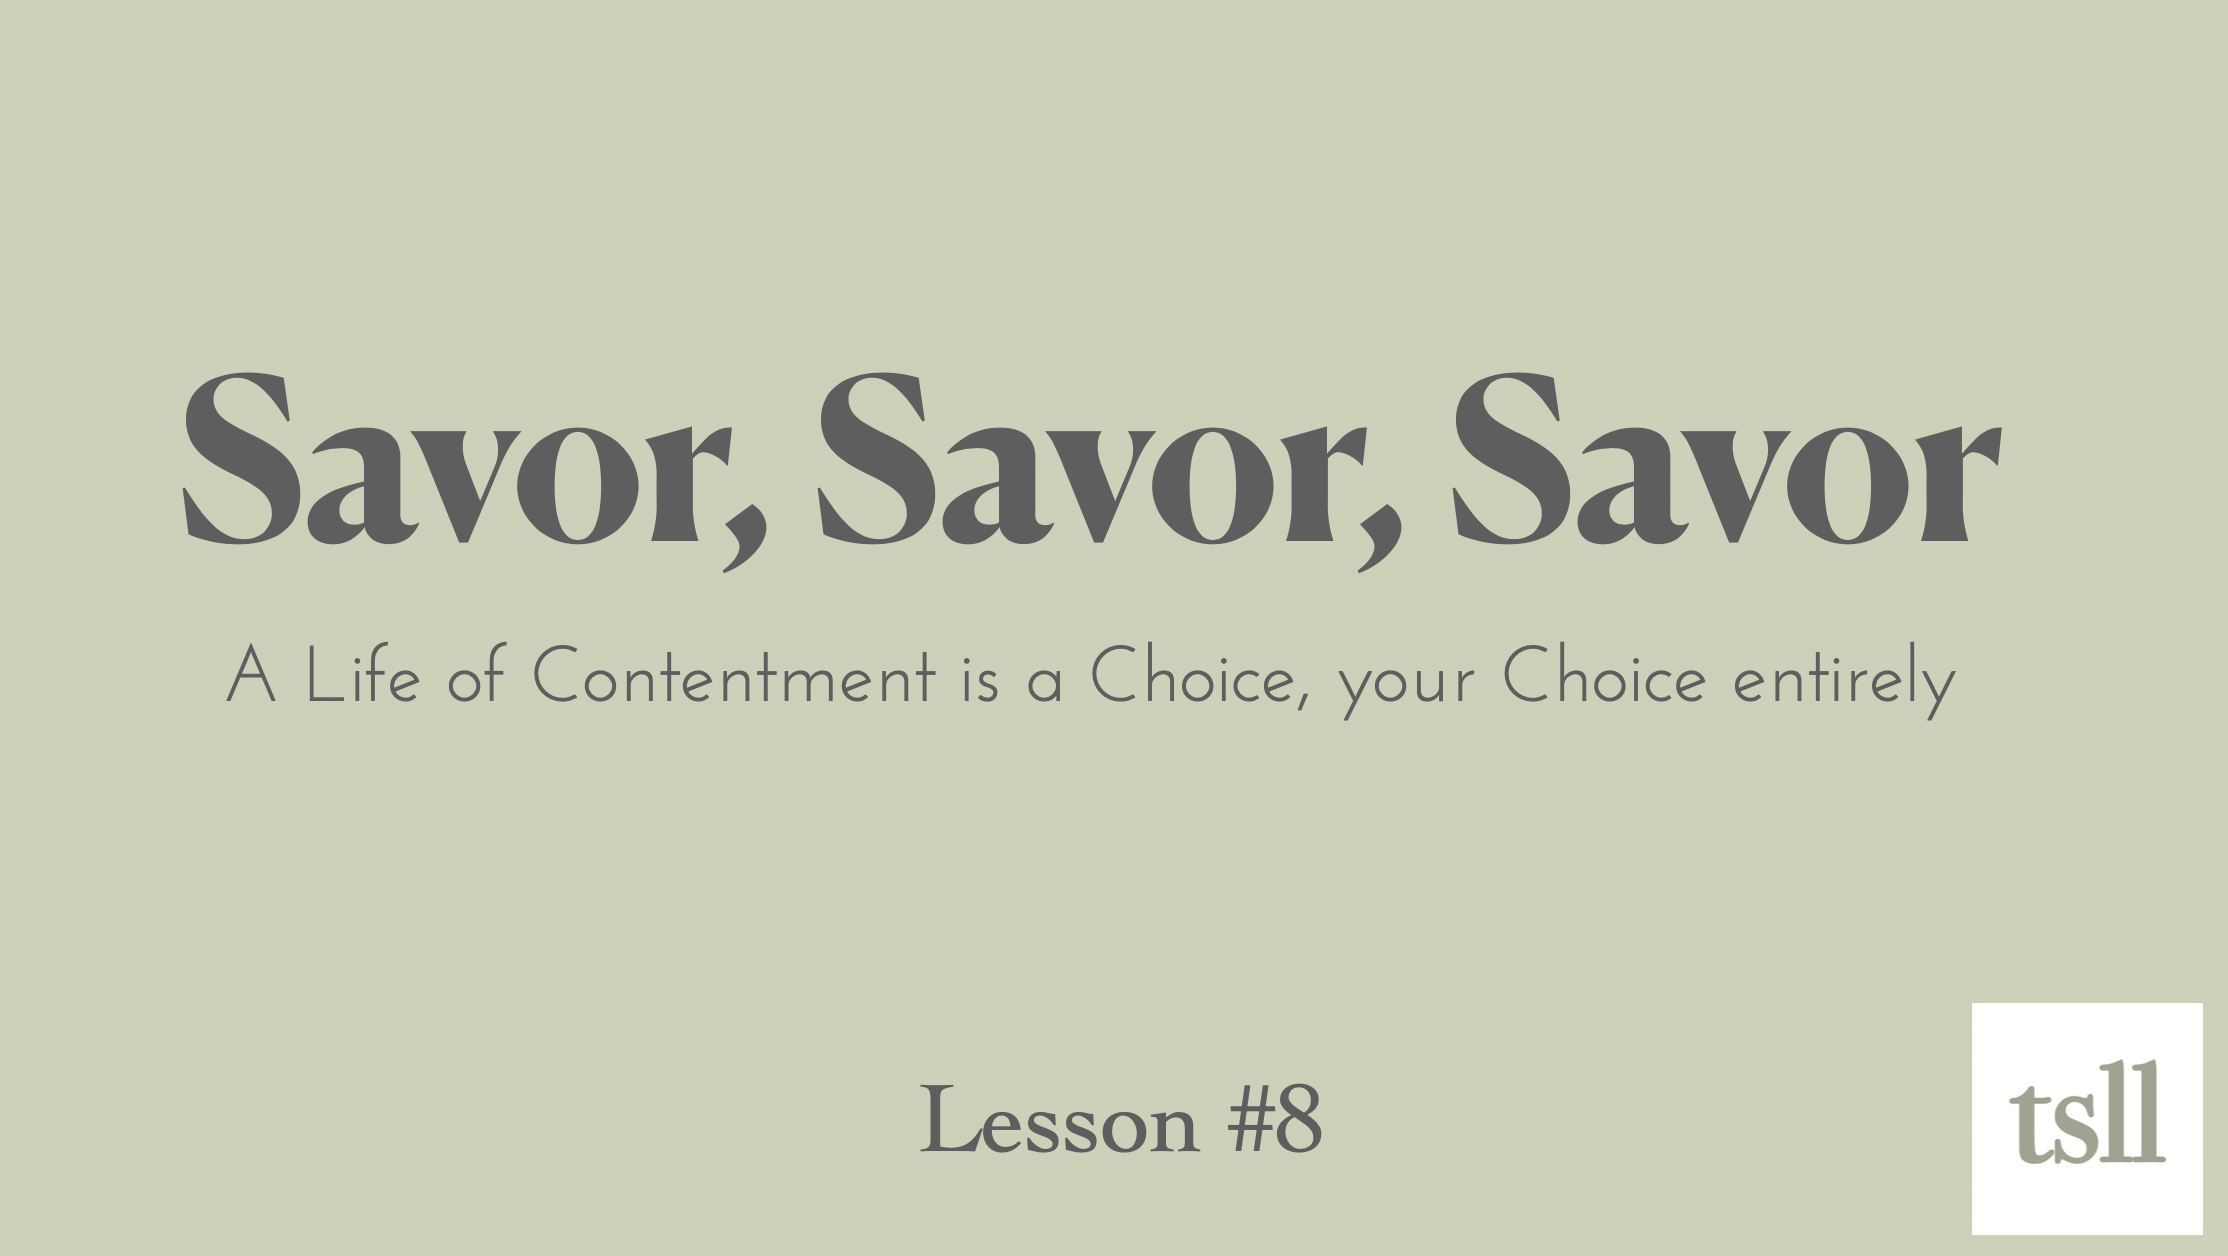 The Final Part: Savor, Savor, Savor. A Life of Contentment is a Choice, Your Choice Entirely, (11:34)